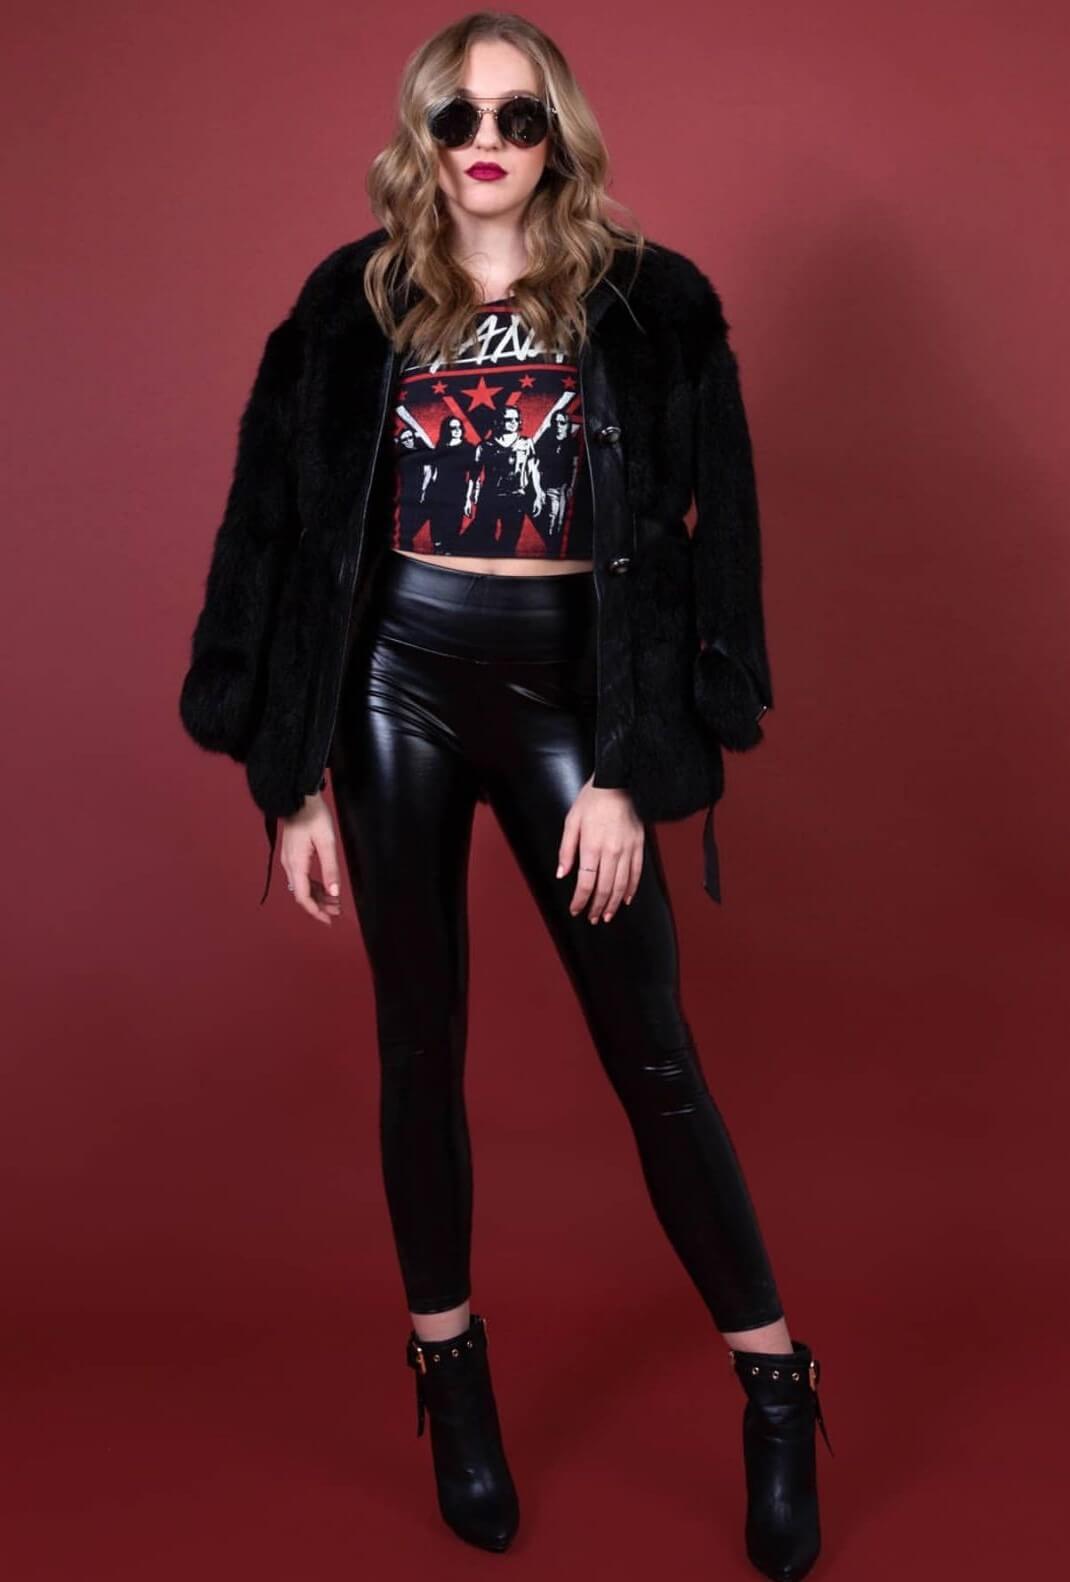 Brynn Rumfallo In Black Bomber Jacket Under T-shirt With Shiny Leather Pants